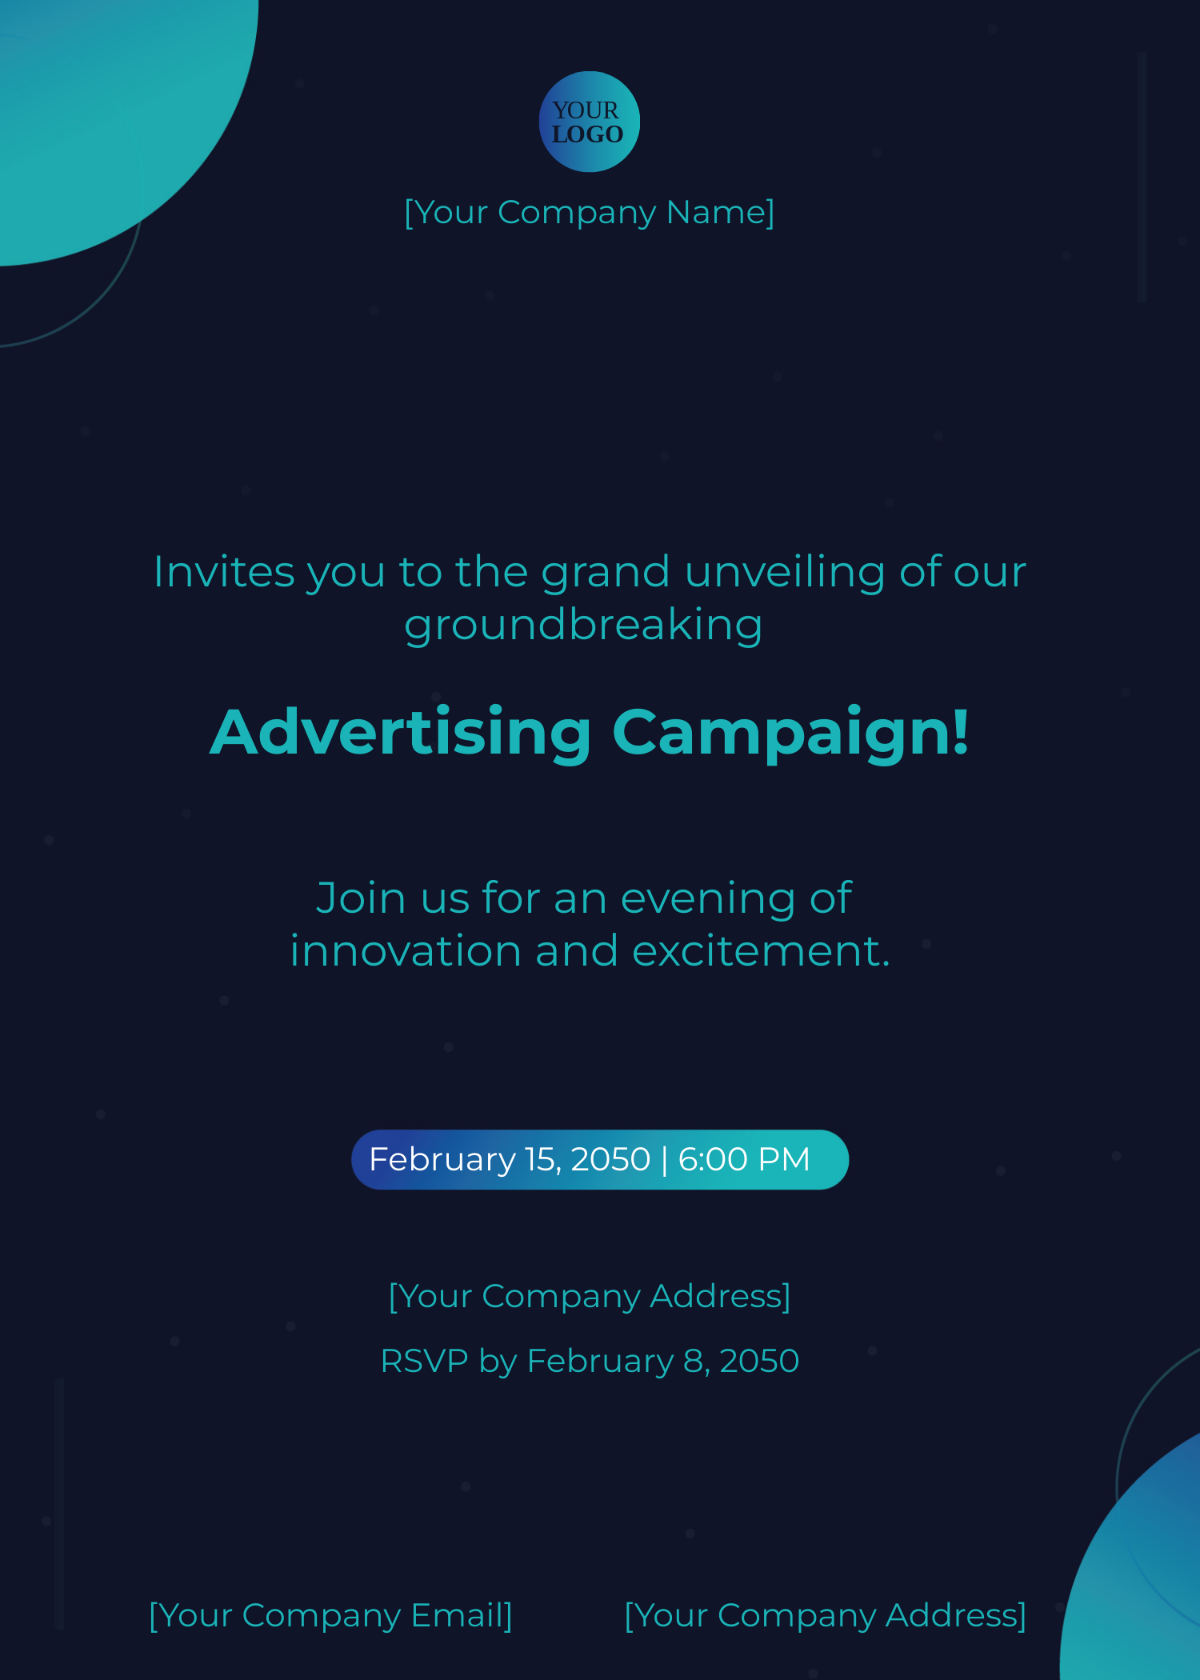 Advertising Campaign Launch Invitation Card Template